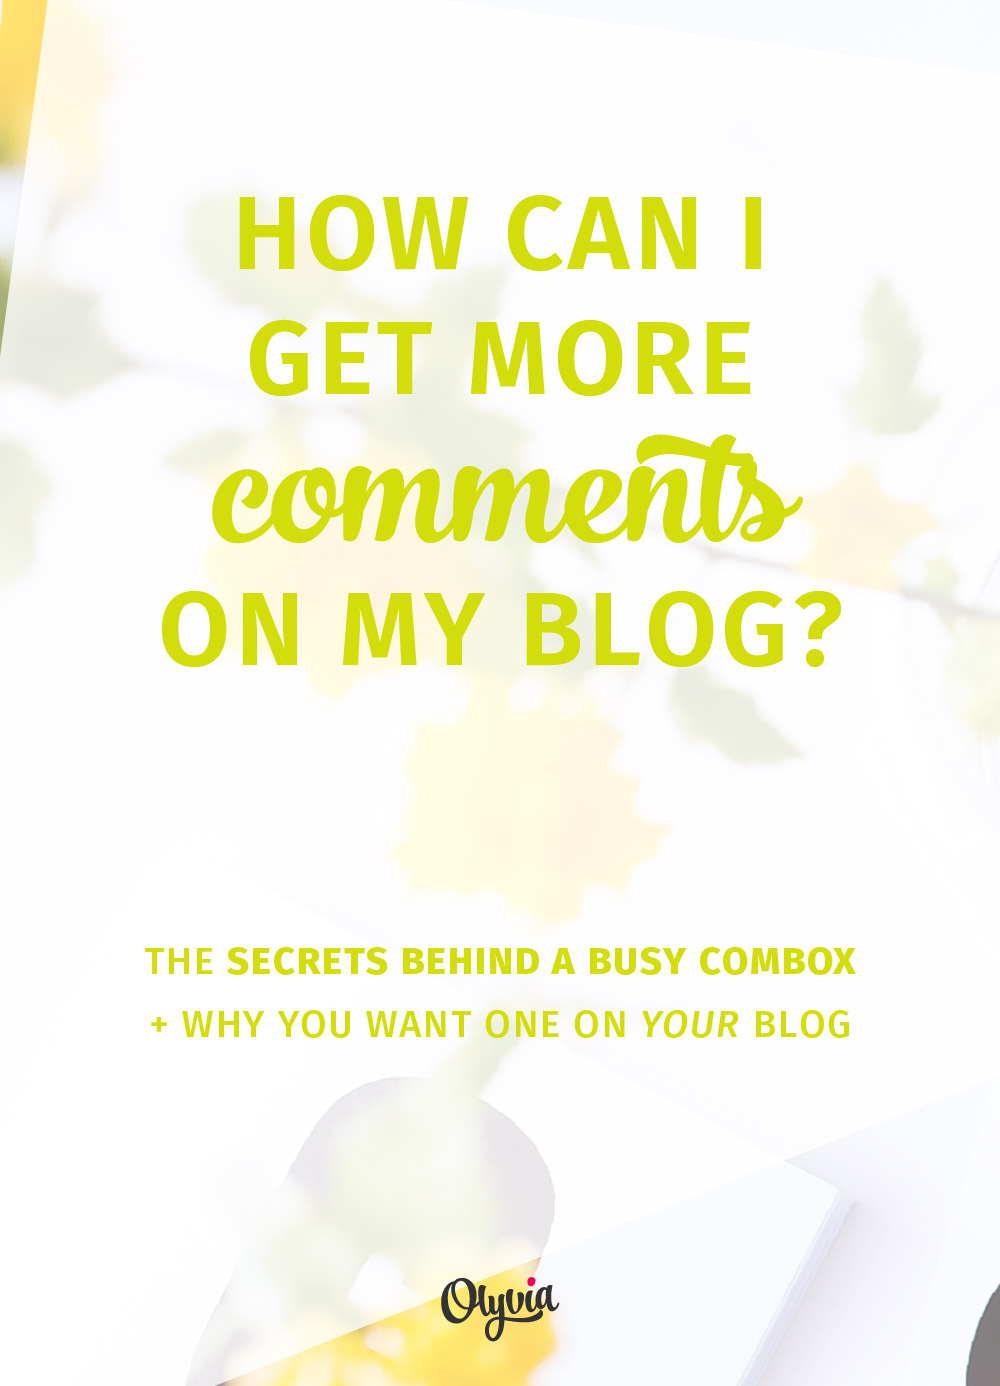 How do I get more blog comments? Here are 5 secrets behind a busy combox + why you want one on your blog.